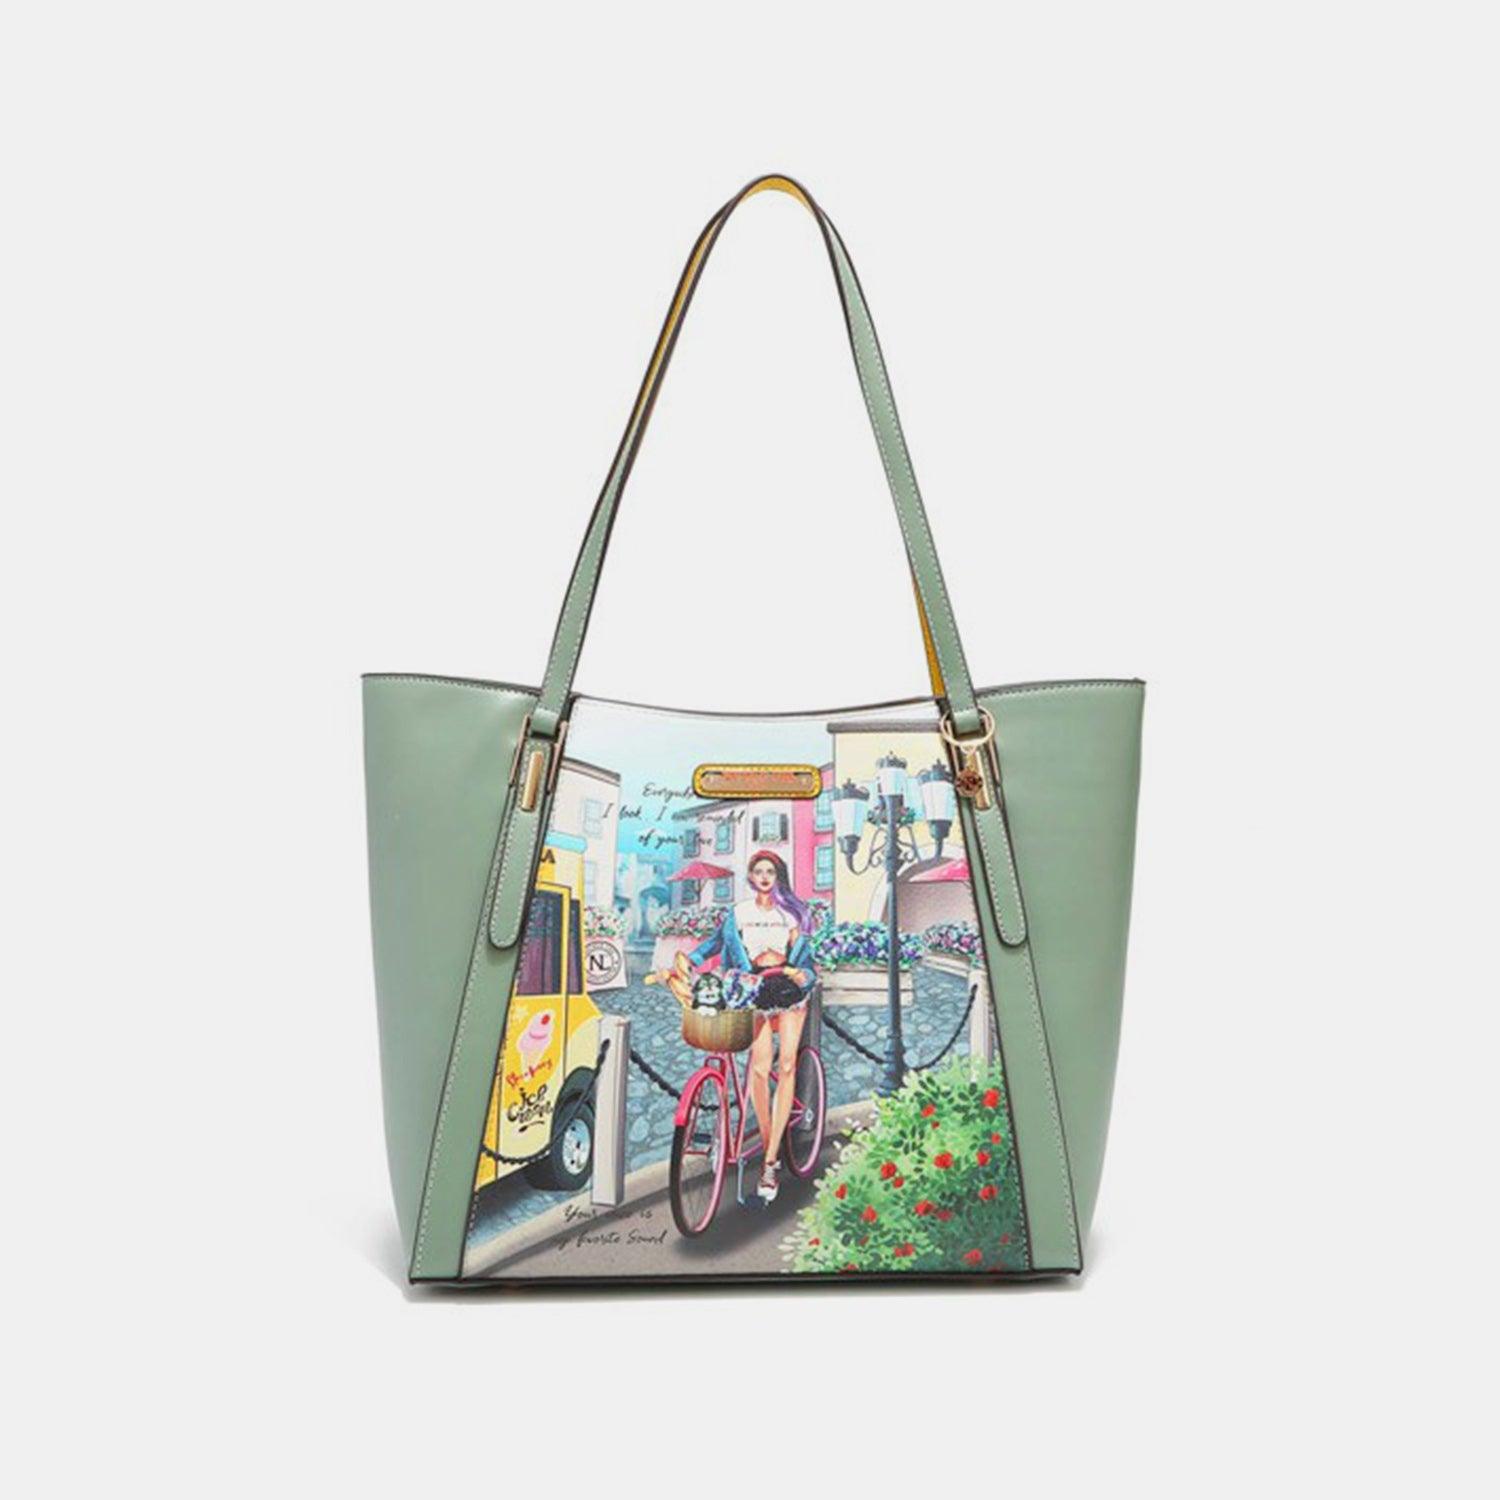 a handbag with a painting of a woman riding a bike